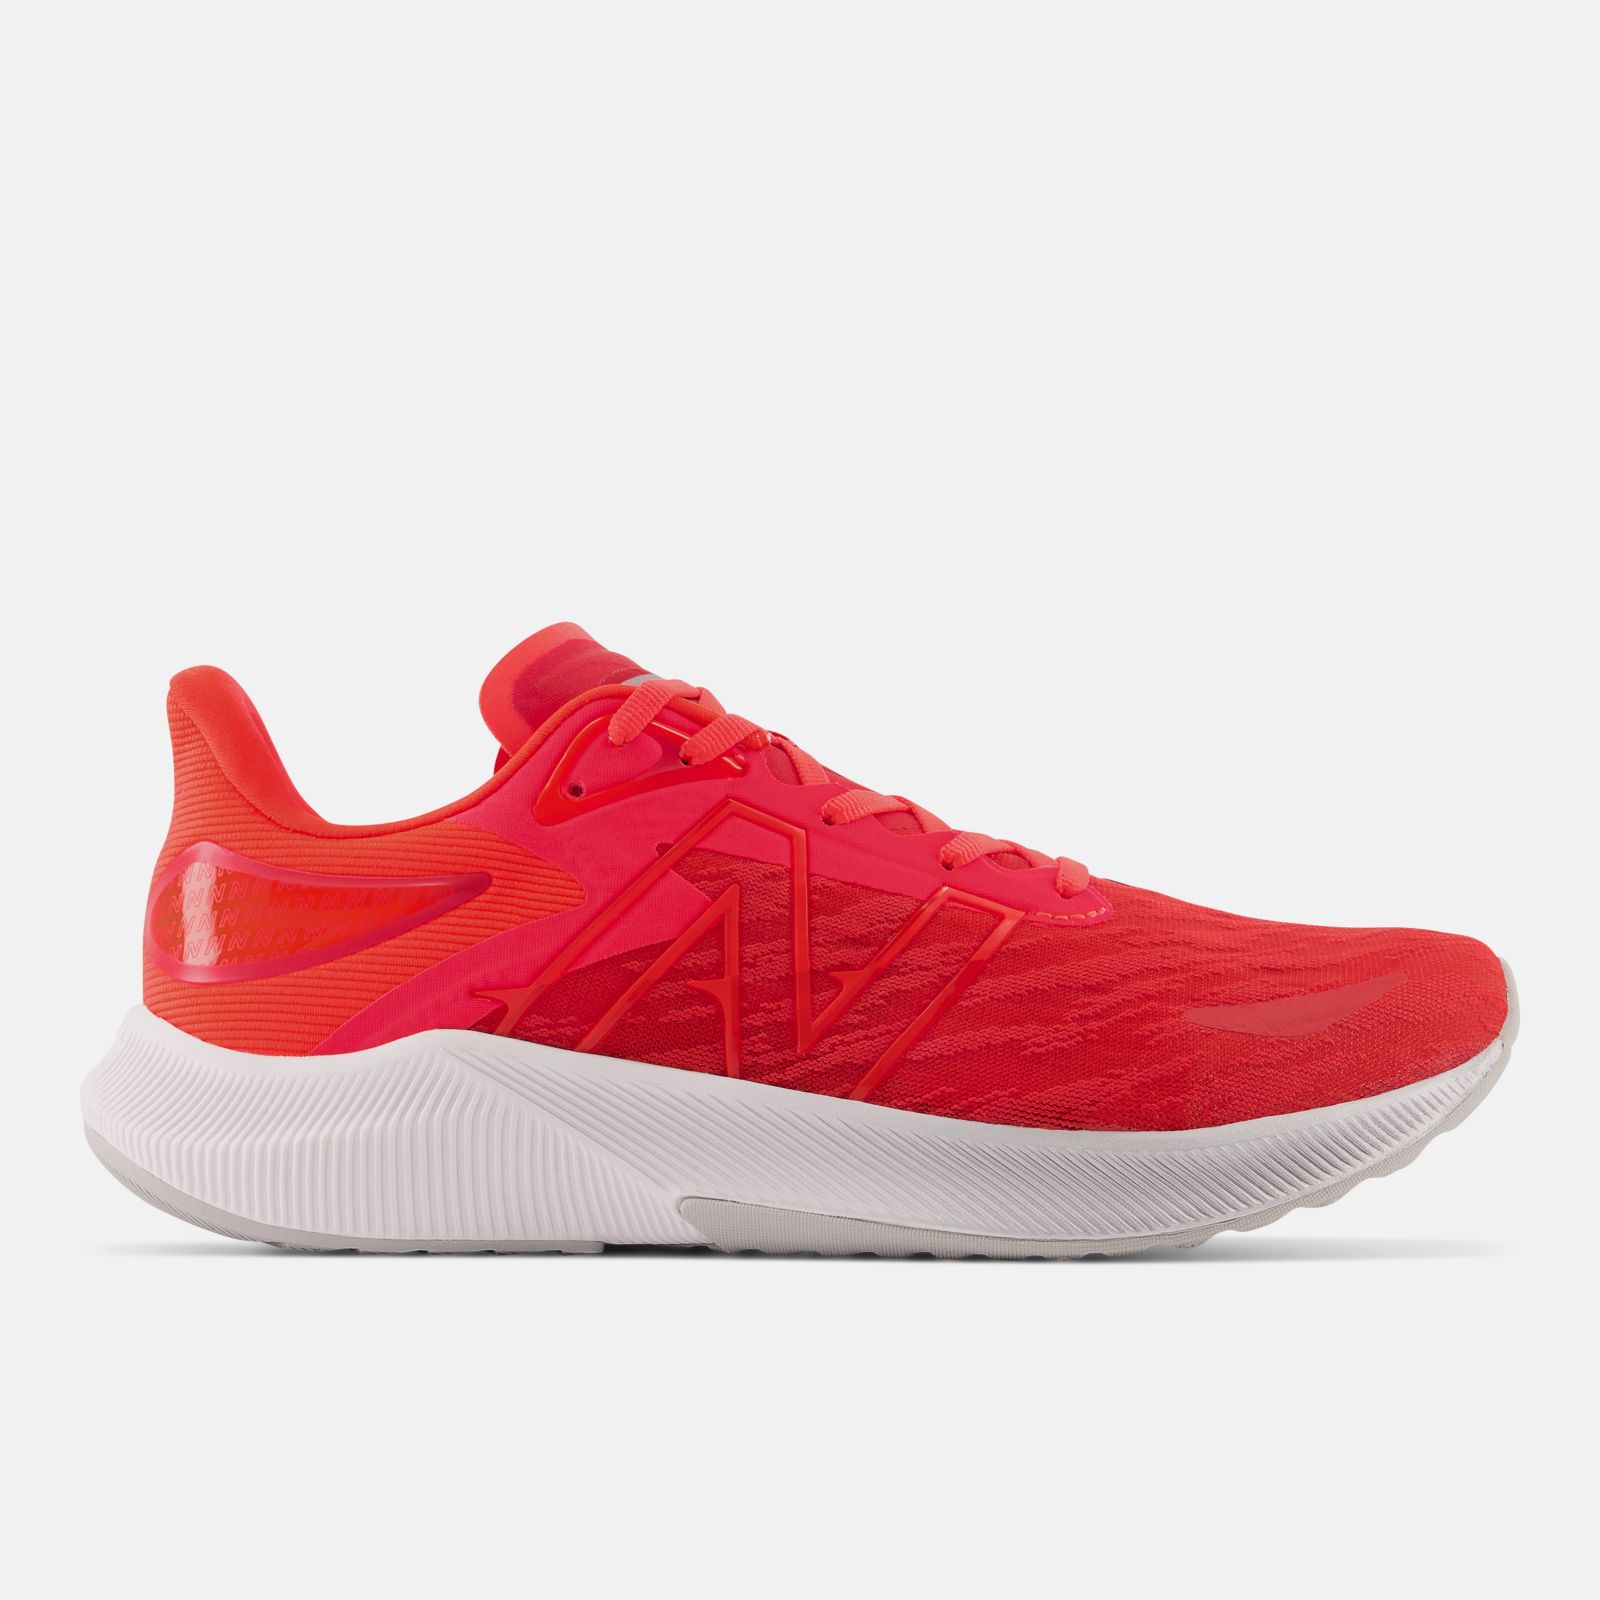 New Balance FuelCell Propel v3, Red, swatch